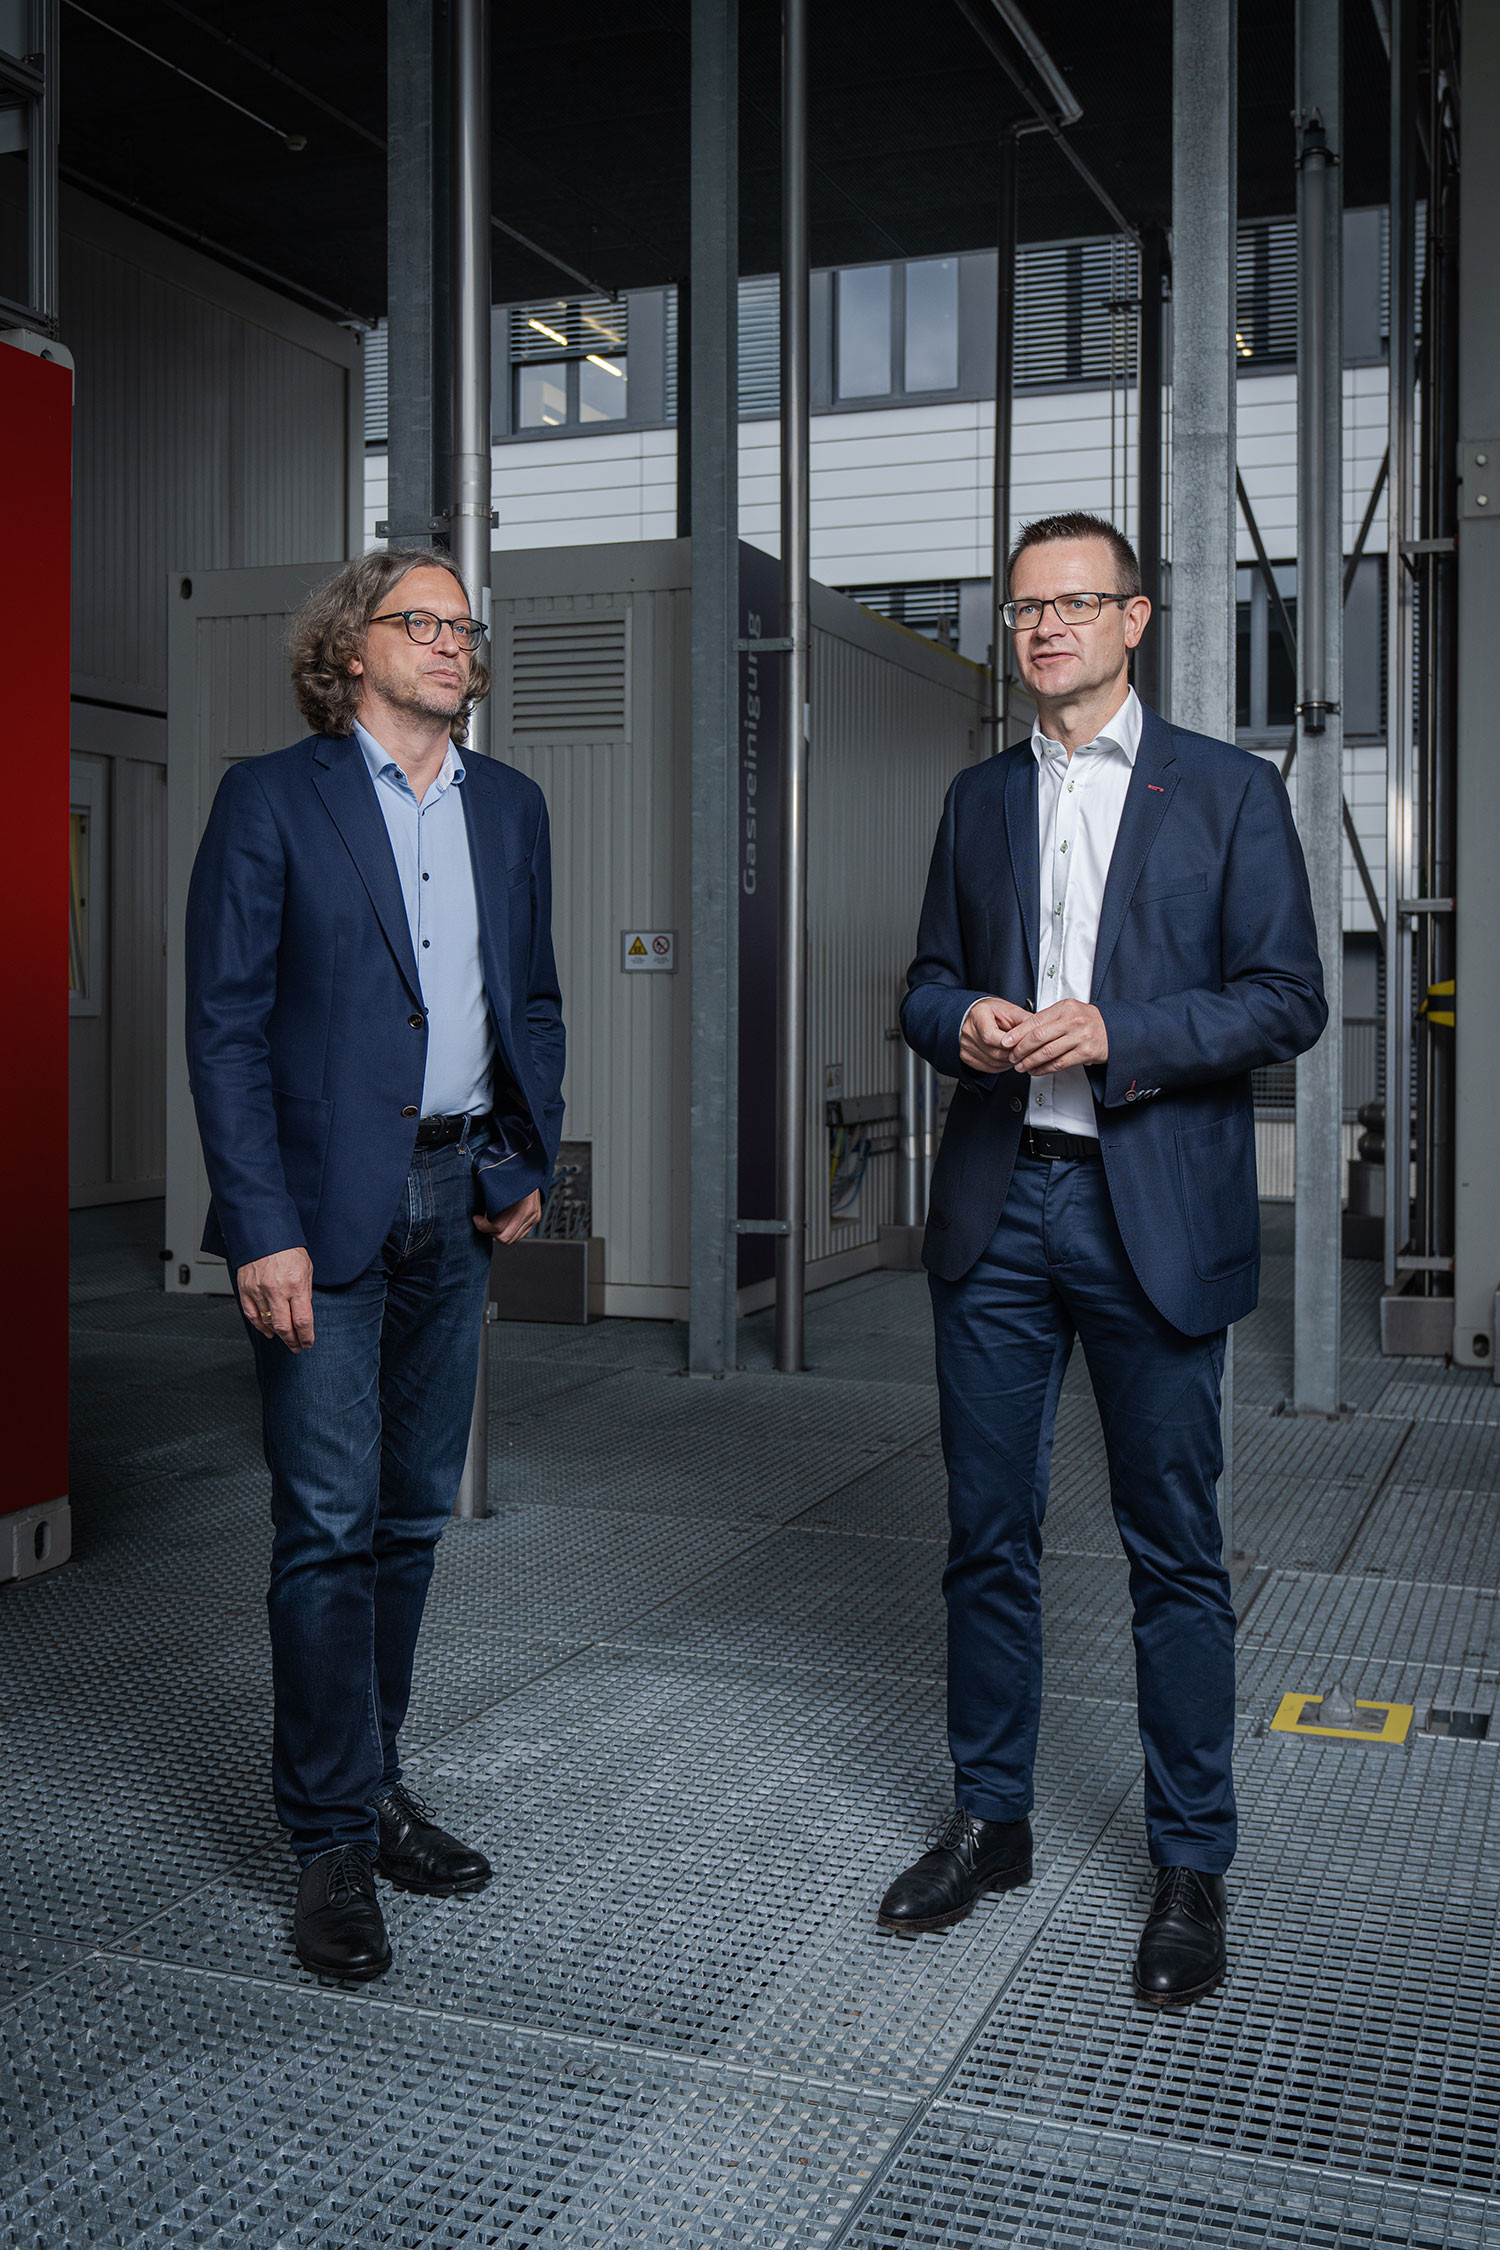 At the ESI Platform, used for researching renewables in all their complex interrelations: Andreas Pautz (left), Head of the Research Division Nuclear Energy and Safety, and Thomas J. Schmidt, Head of the Research Division Energy and Environment © Paul Scherrer Institute/Mahir Dzambegovic